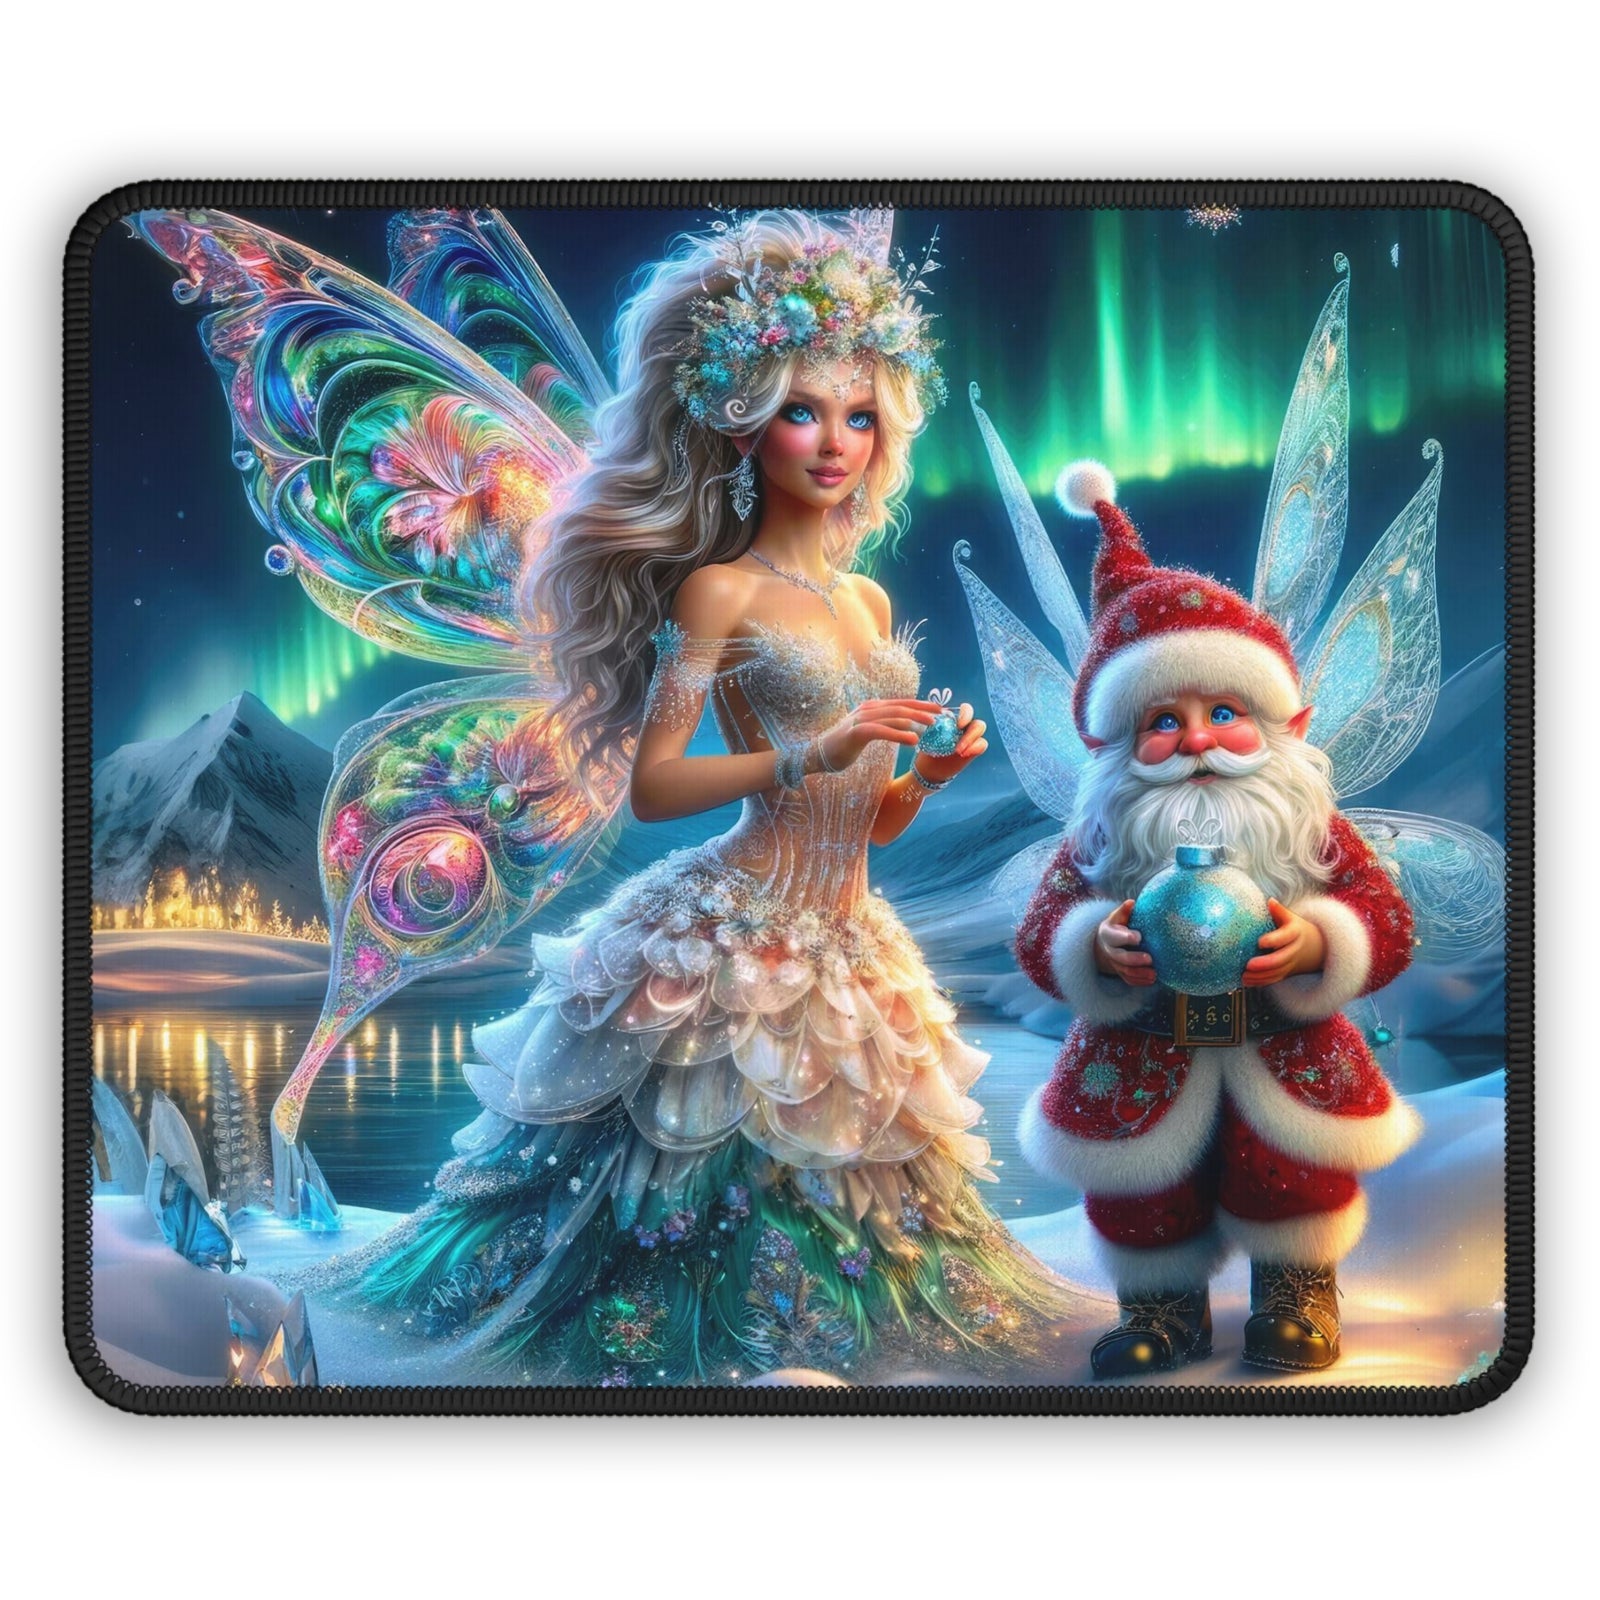 A Fairytale Christmas Gaming Mouse Pad